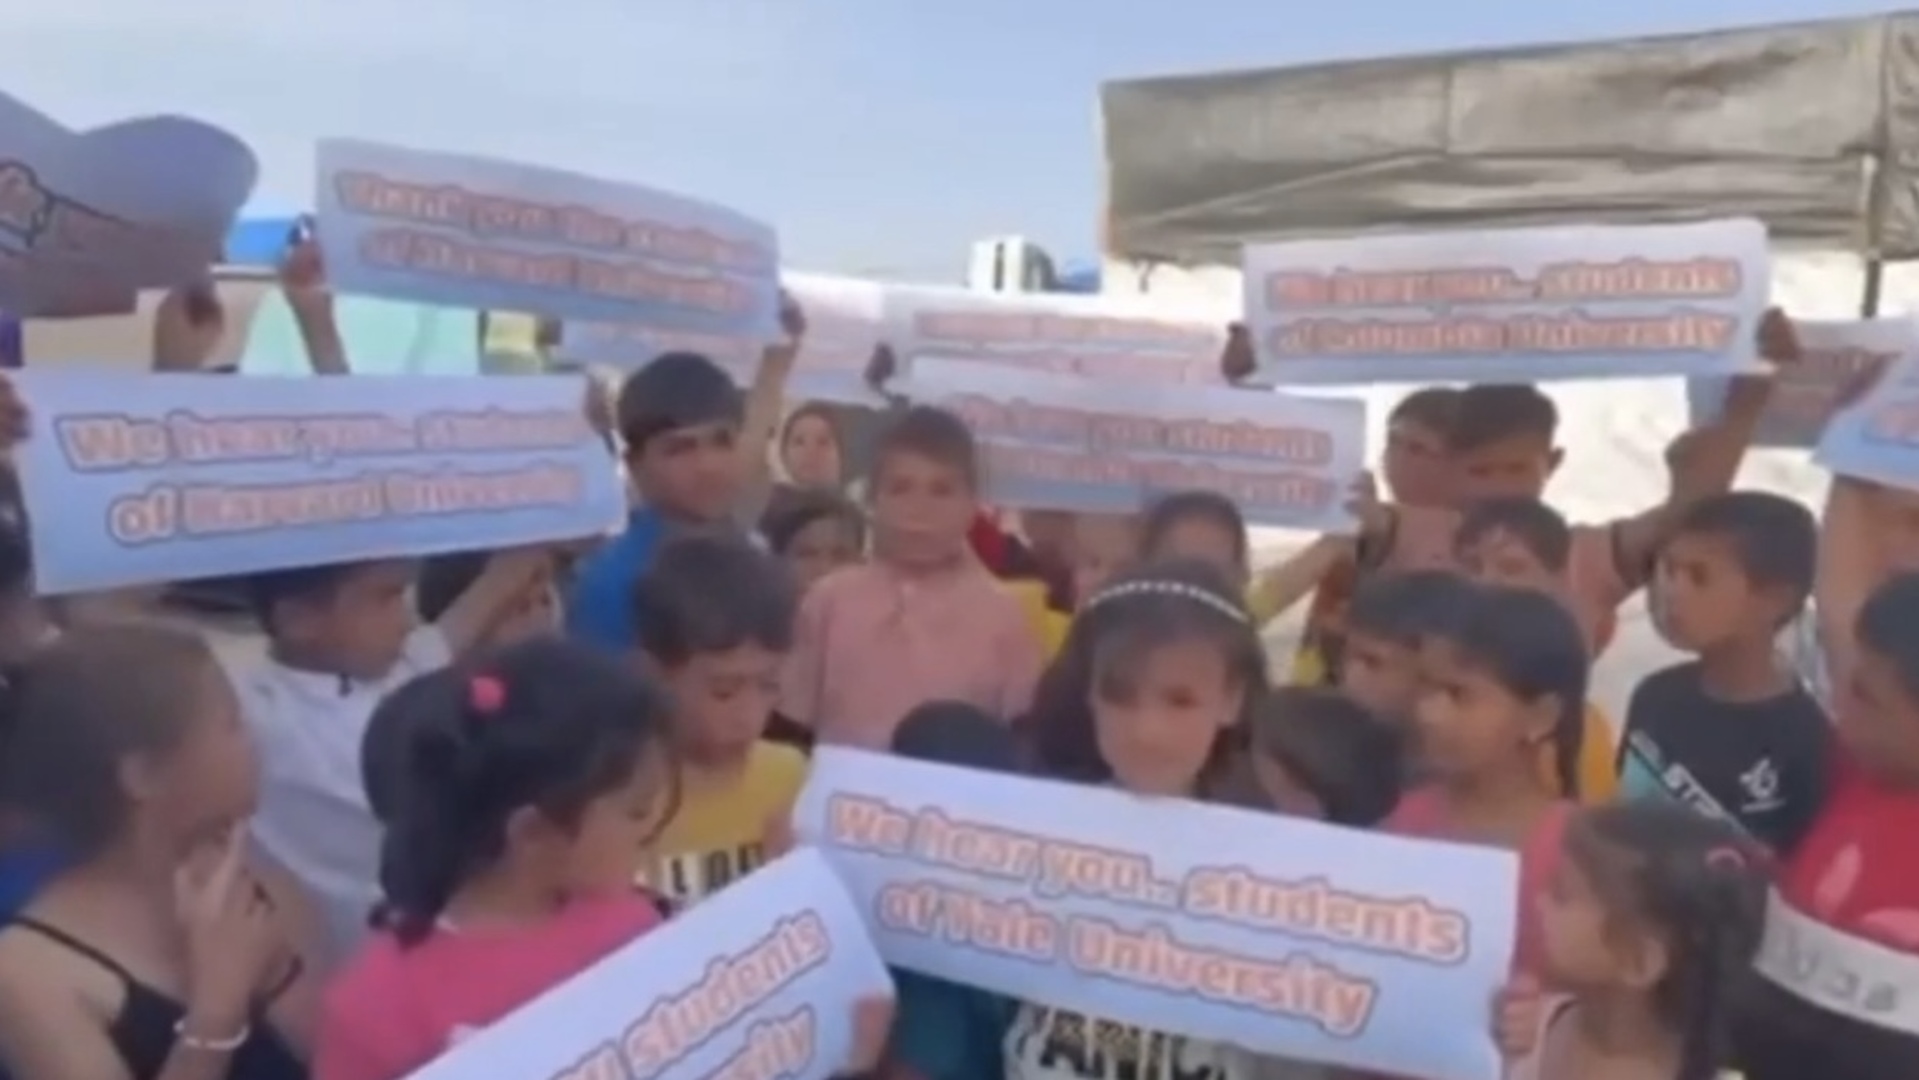 'We love you': Gaza children react to U.S. campus protests